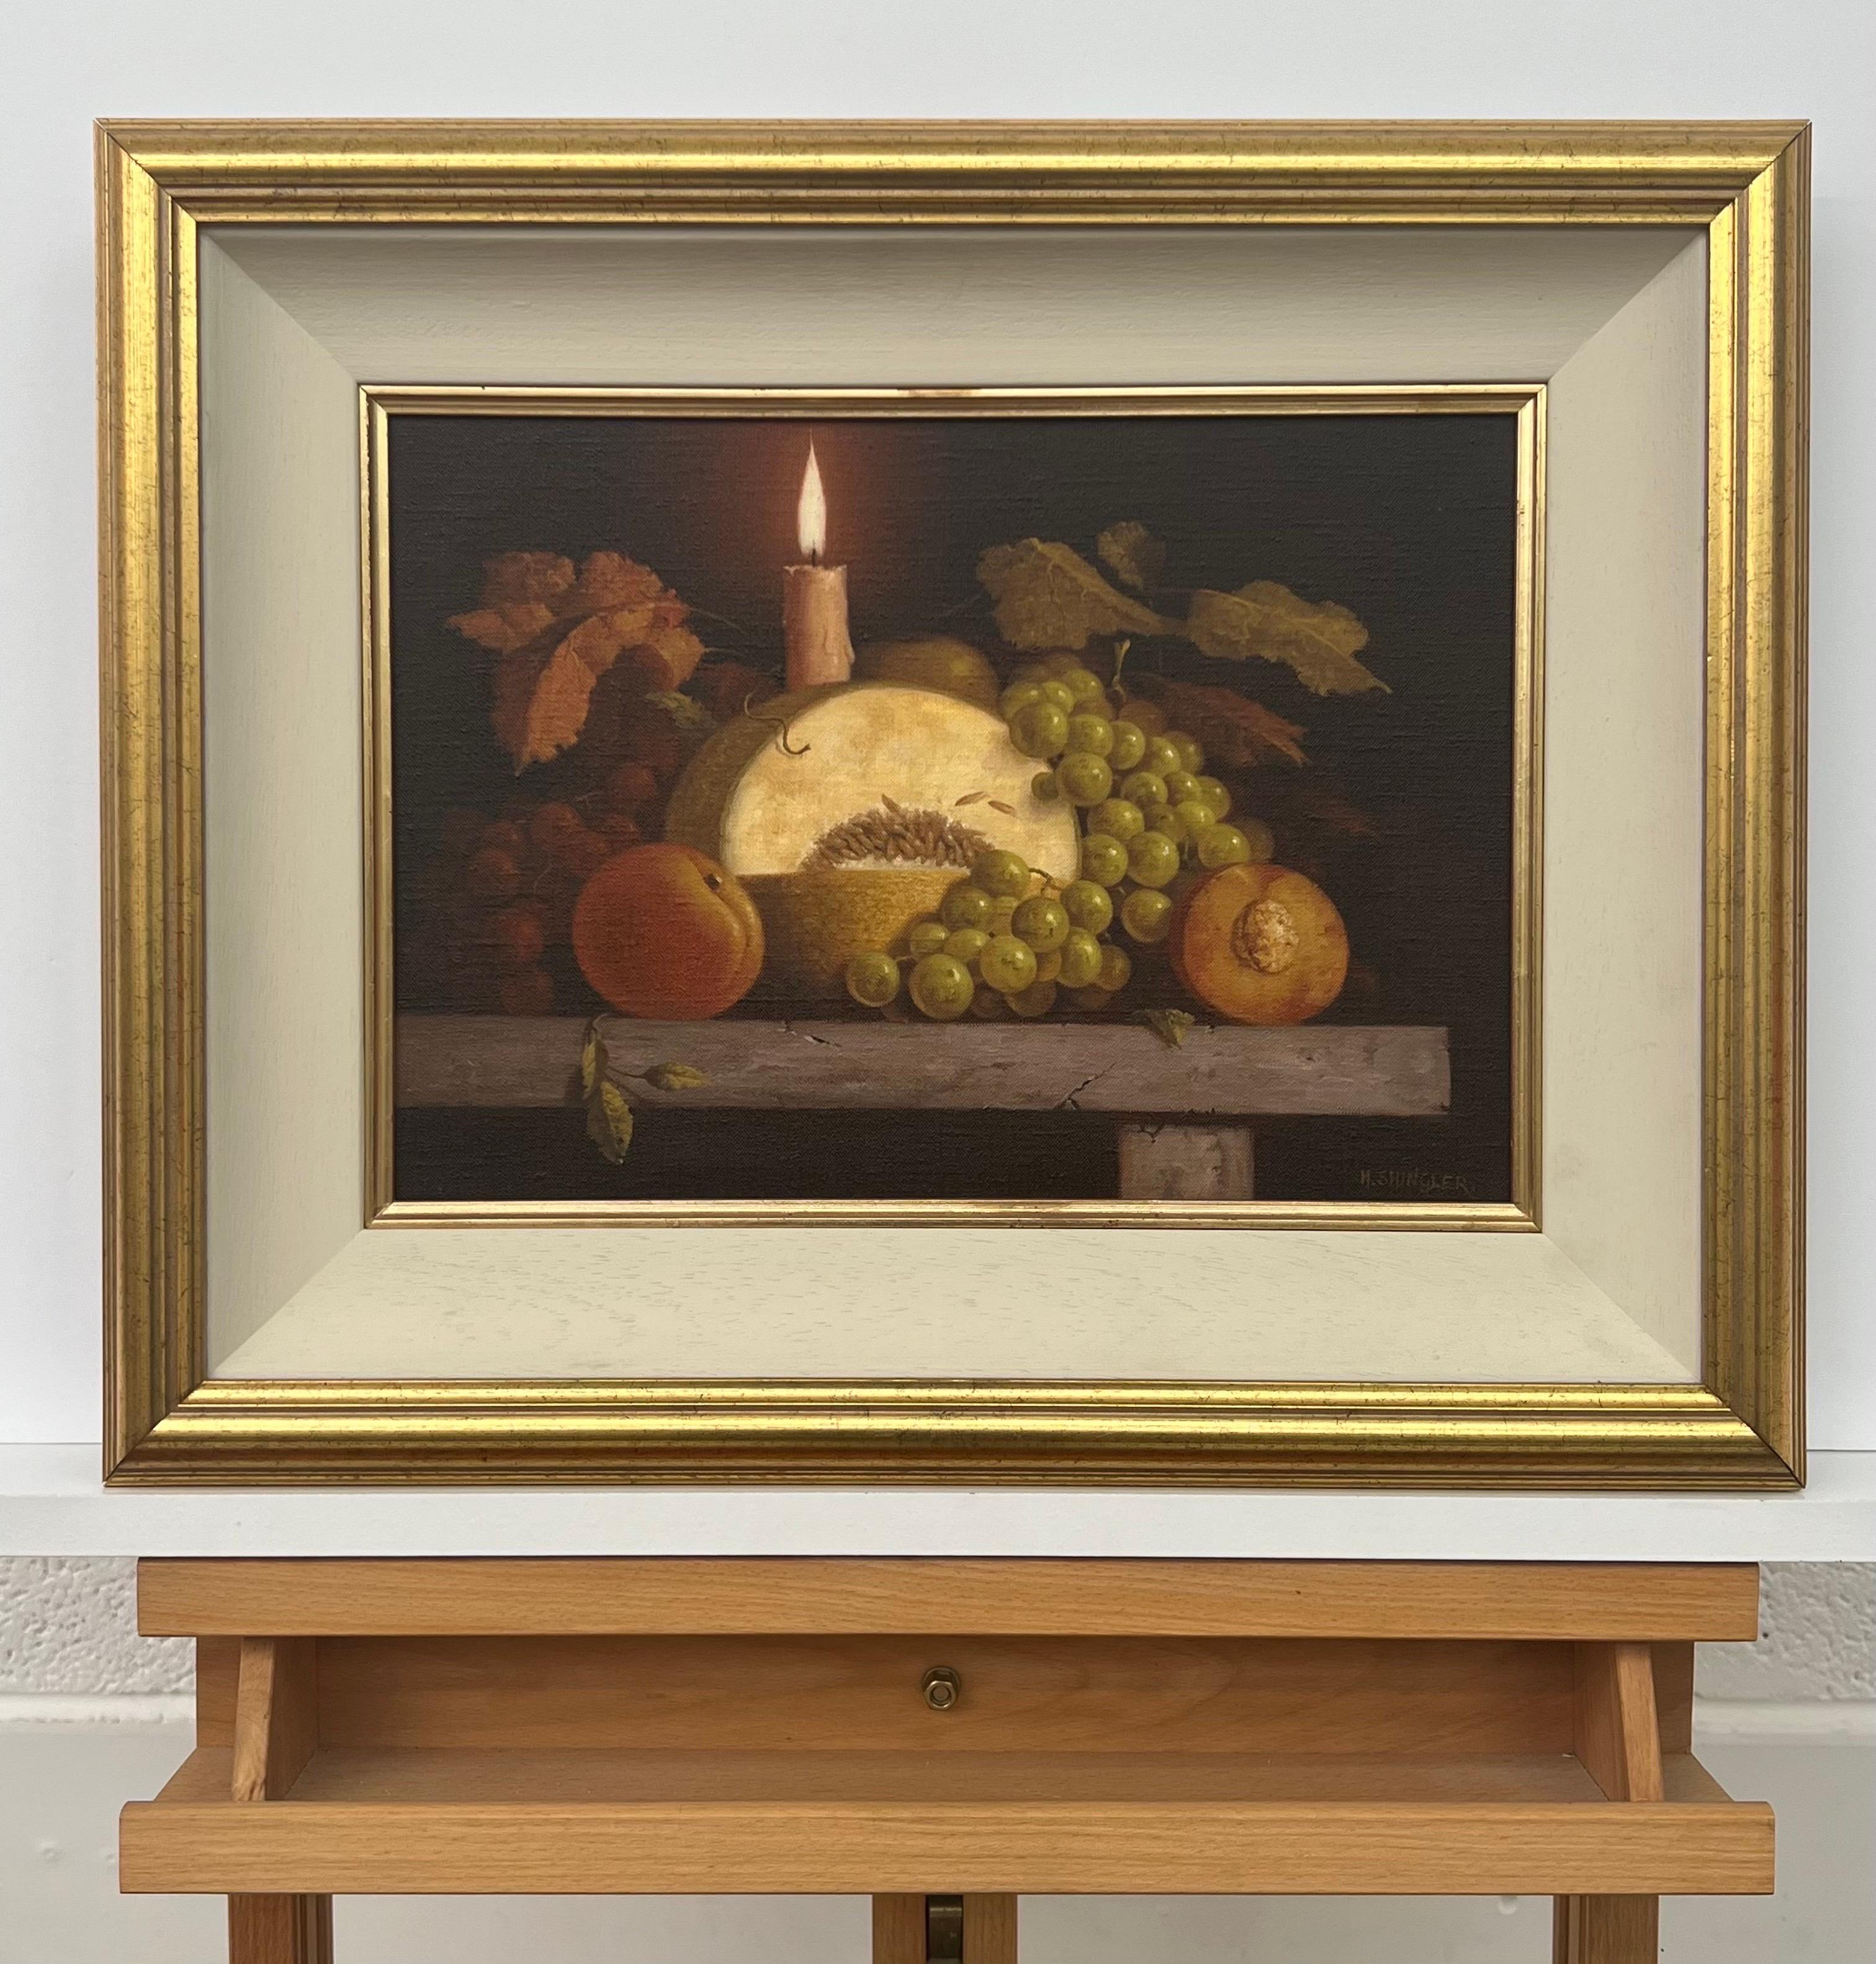 Traditional Interior Still Life Oil Painting with Fruit & Candle by 20th Century British Artist, Howard Shingler. This original has a lovely warm ambience and is presented in a gold frame with off-white insert.

Art measures 14 x 10 inches
Frame